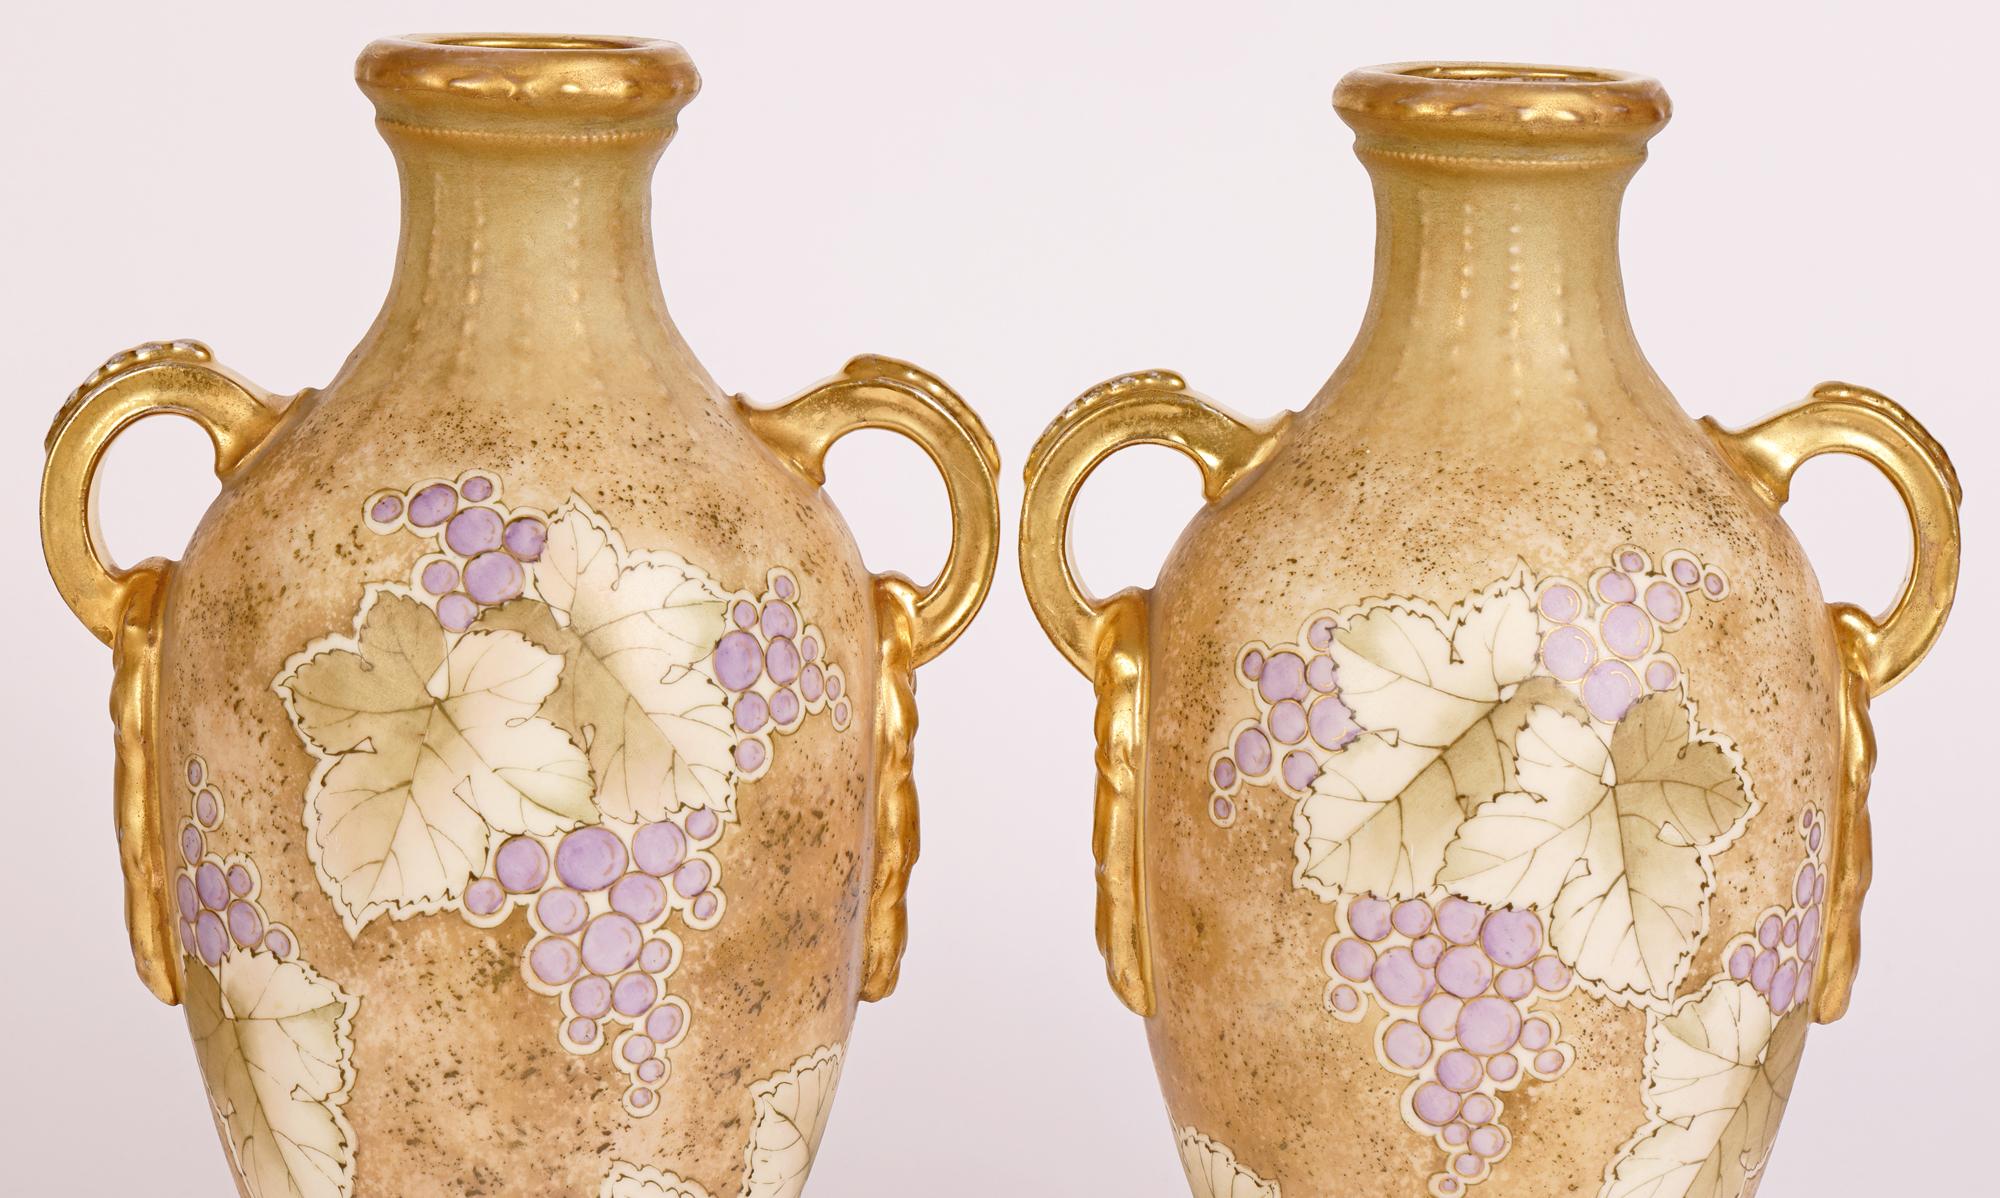 A stylish pair Austrian Art Nouveau hand-painted twin handled vases decorated with fruiting vines by the renowned Turn Teplitz factory run by Riessner, Stellmacher & Kessel and dating from around 1900. The finely made porcelain vases stand on narrow